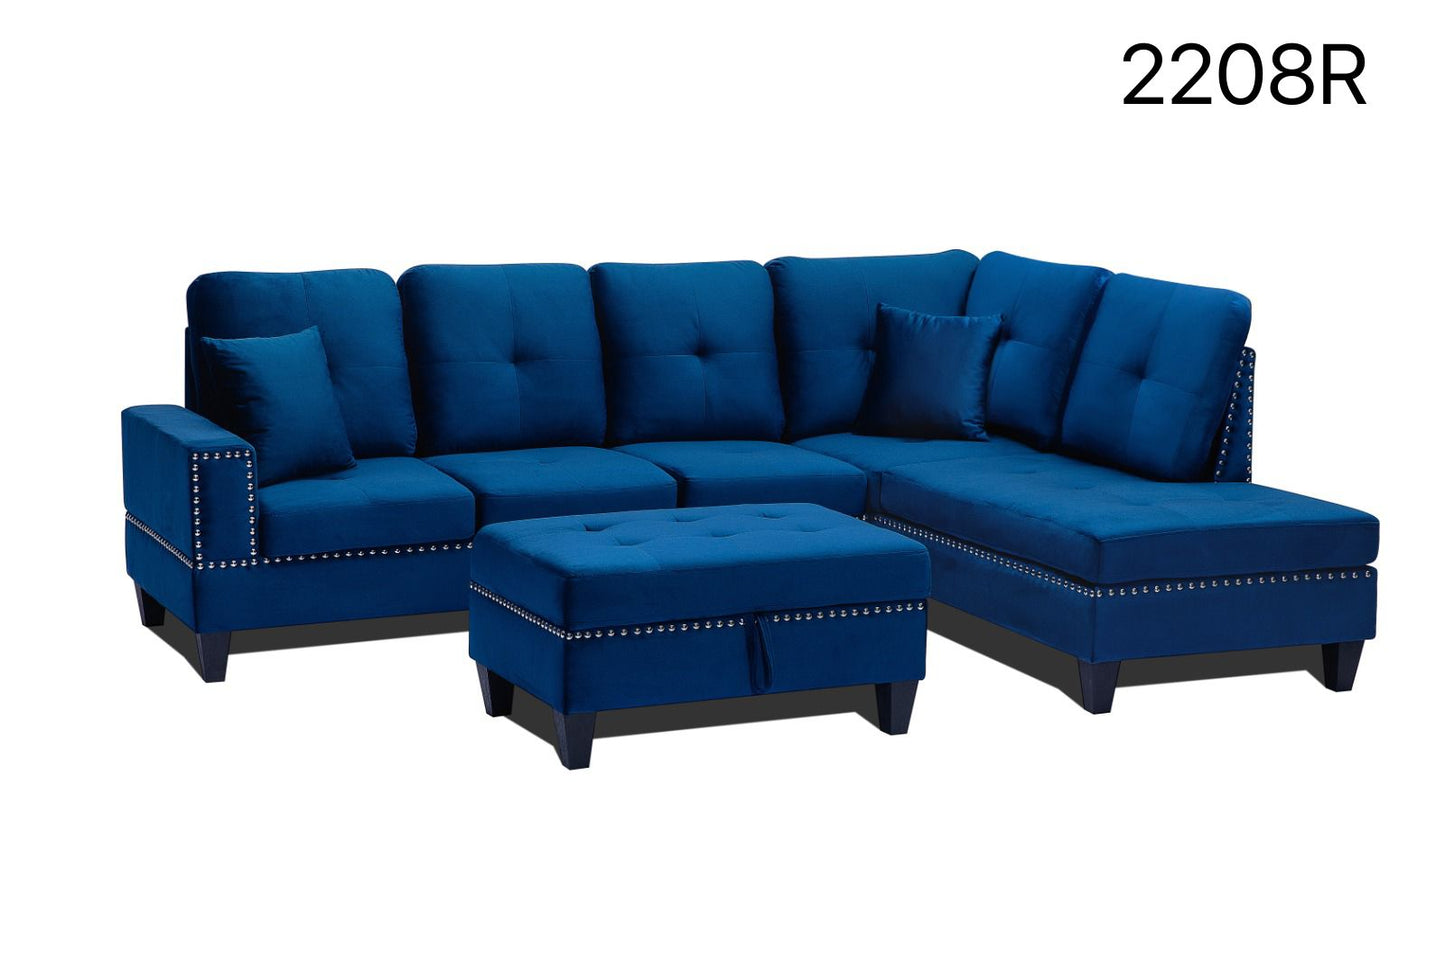 (2208 BLUE RHF)- VELVET FABRIC SECTIONAL SOFA- WITH STORAGE OTTOMAN